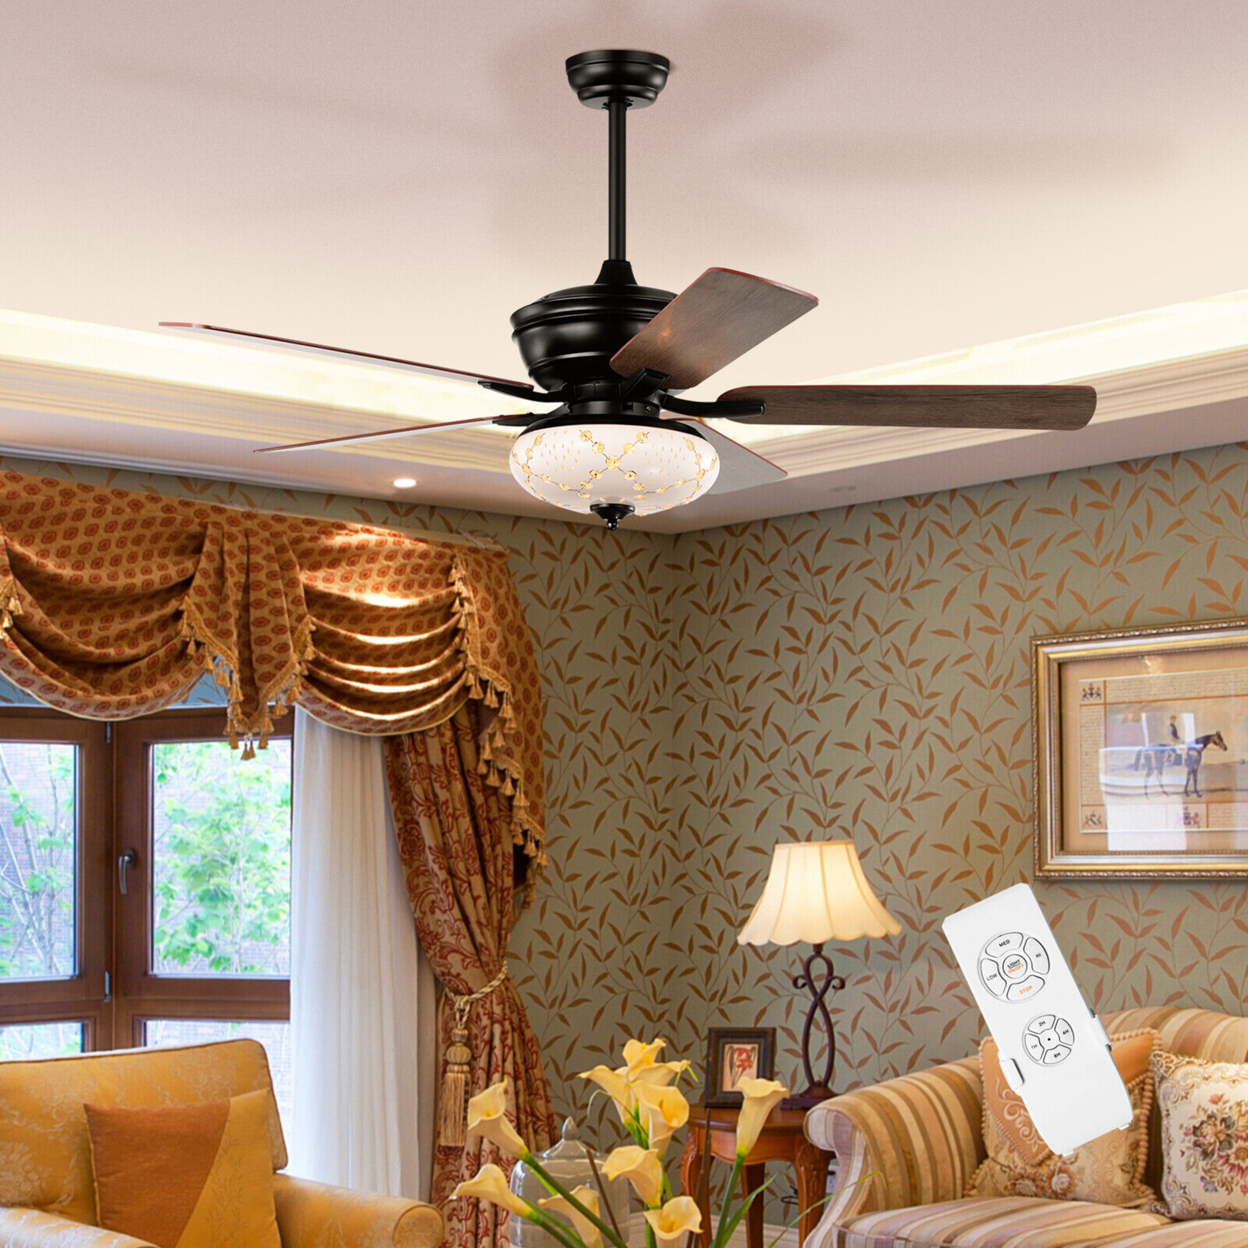 52'' Ceiling Fan With 3 Wind Speeds 5 Reversible Blades & Remote Control - Grey